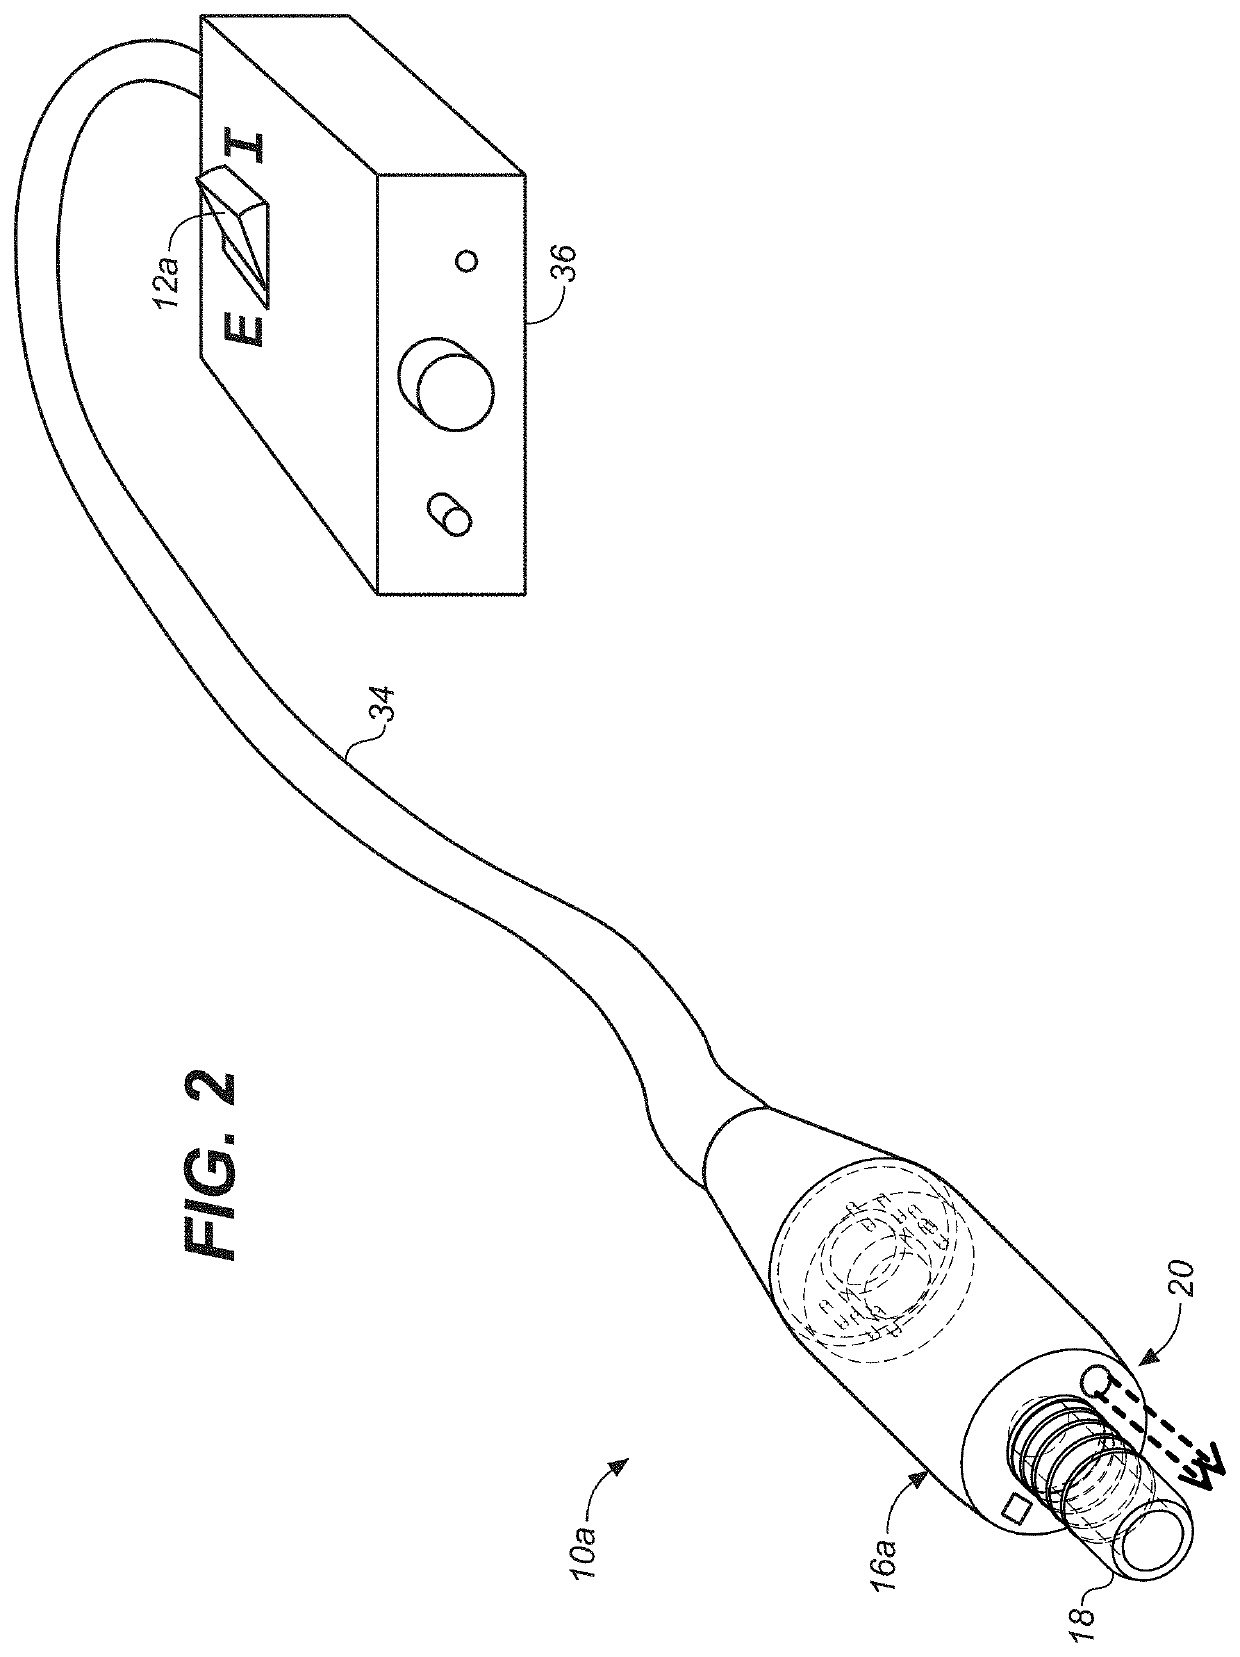 Dental handpiece, motor and coupler with multi-wavelength light outputs